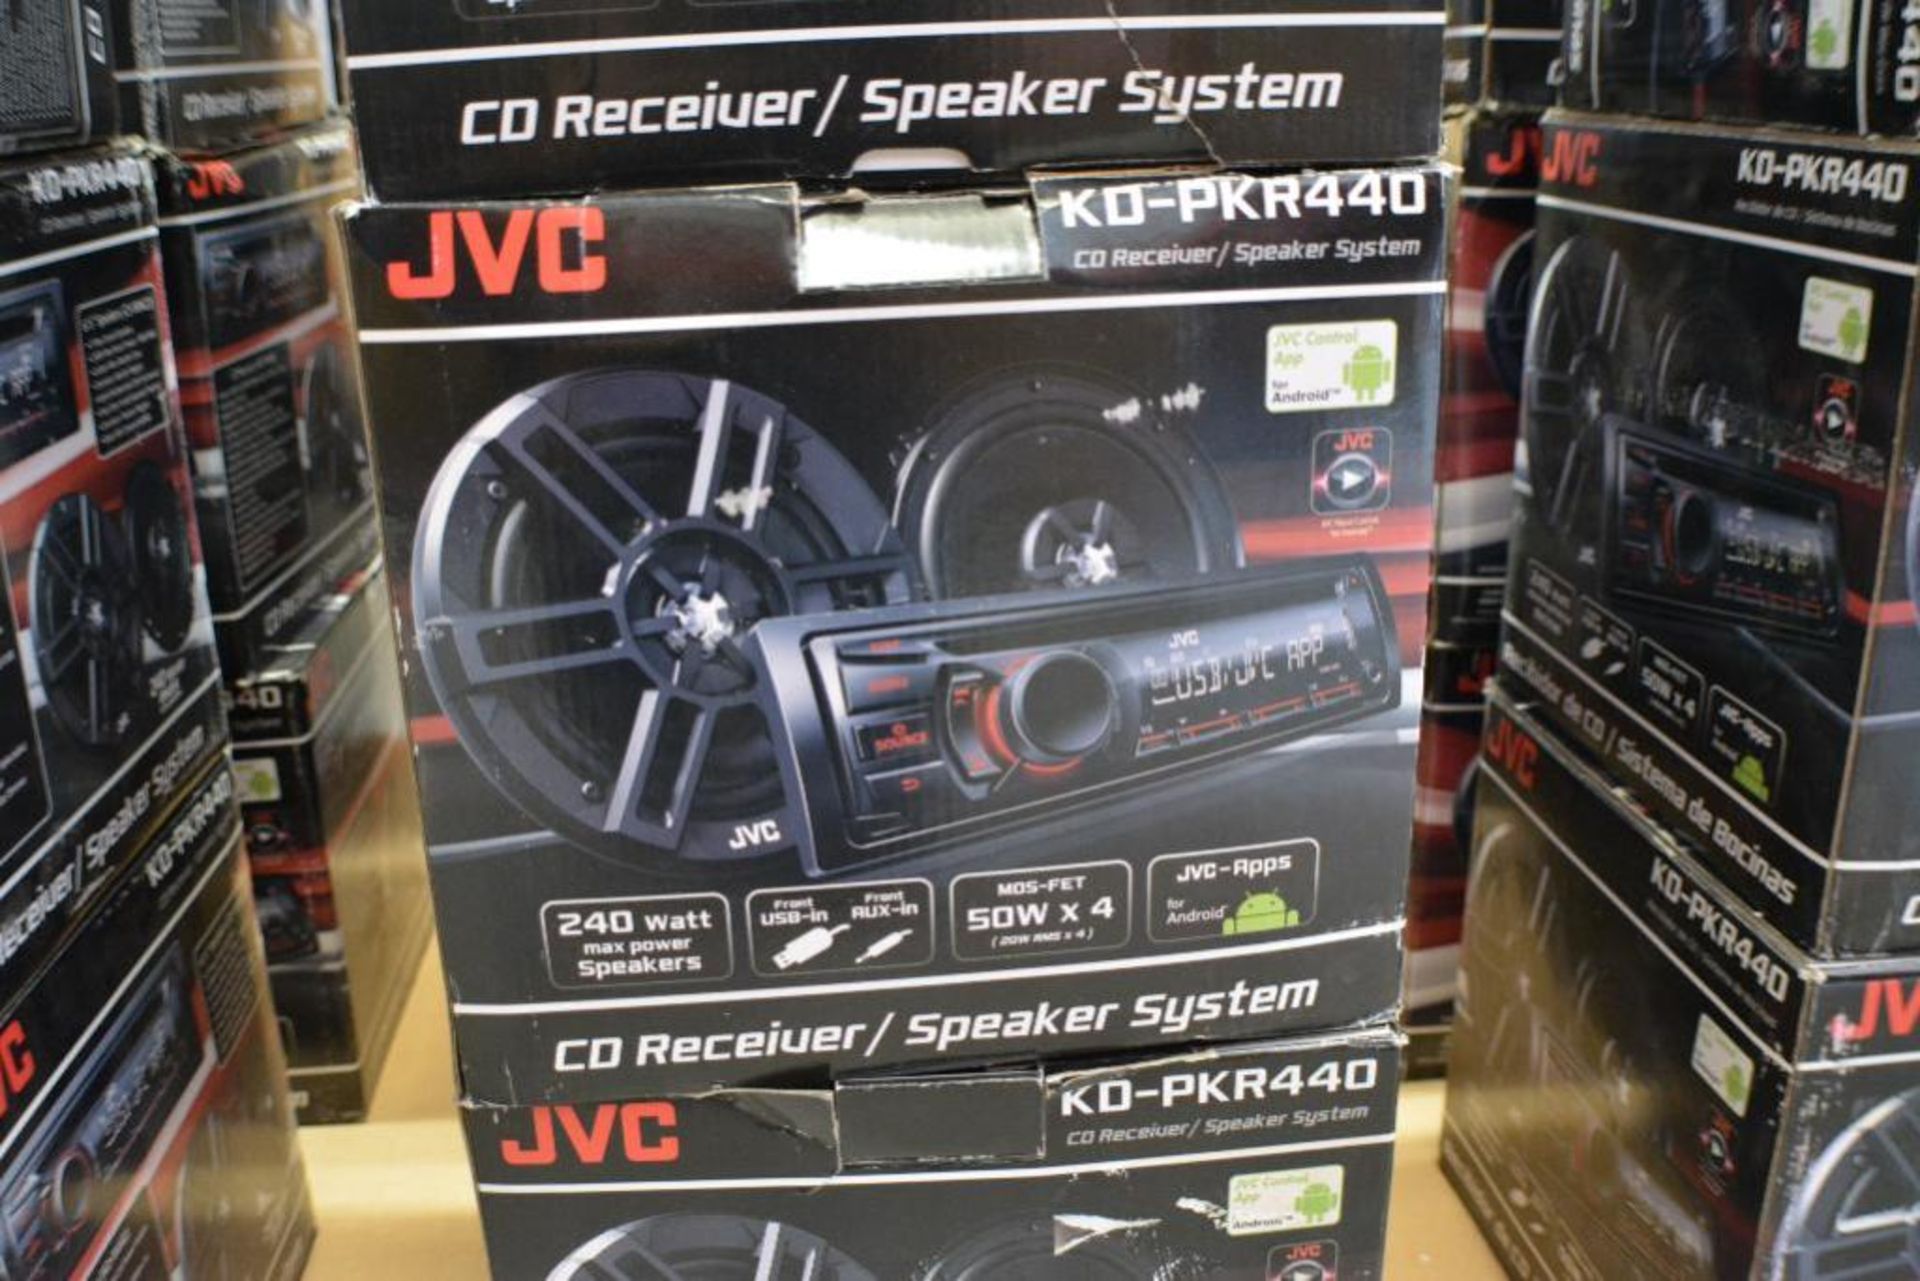 JVC Car Stereo Model KD-PKR440 In-Dash CD receiver/Speaker System. Front USB -In + Front Aux + MOS-F - Image 2 of 2